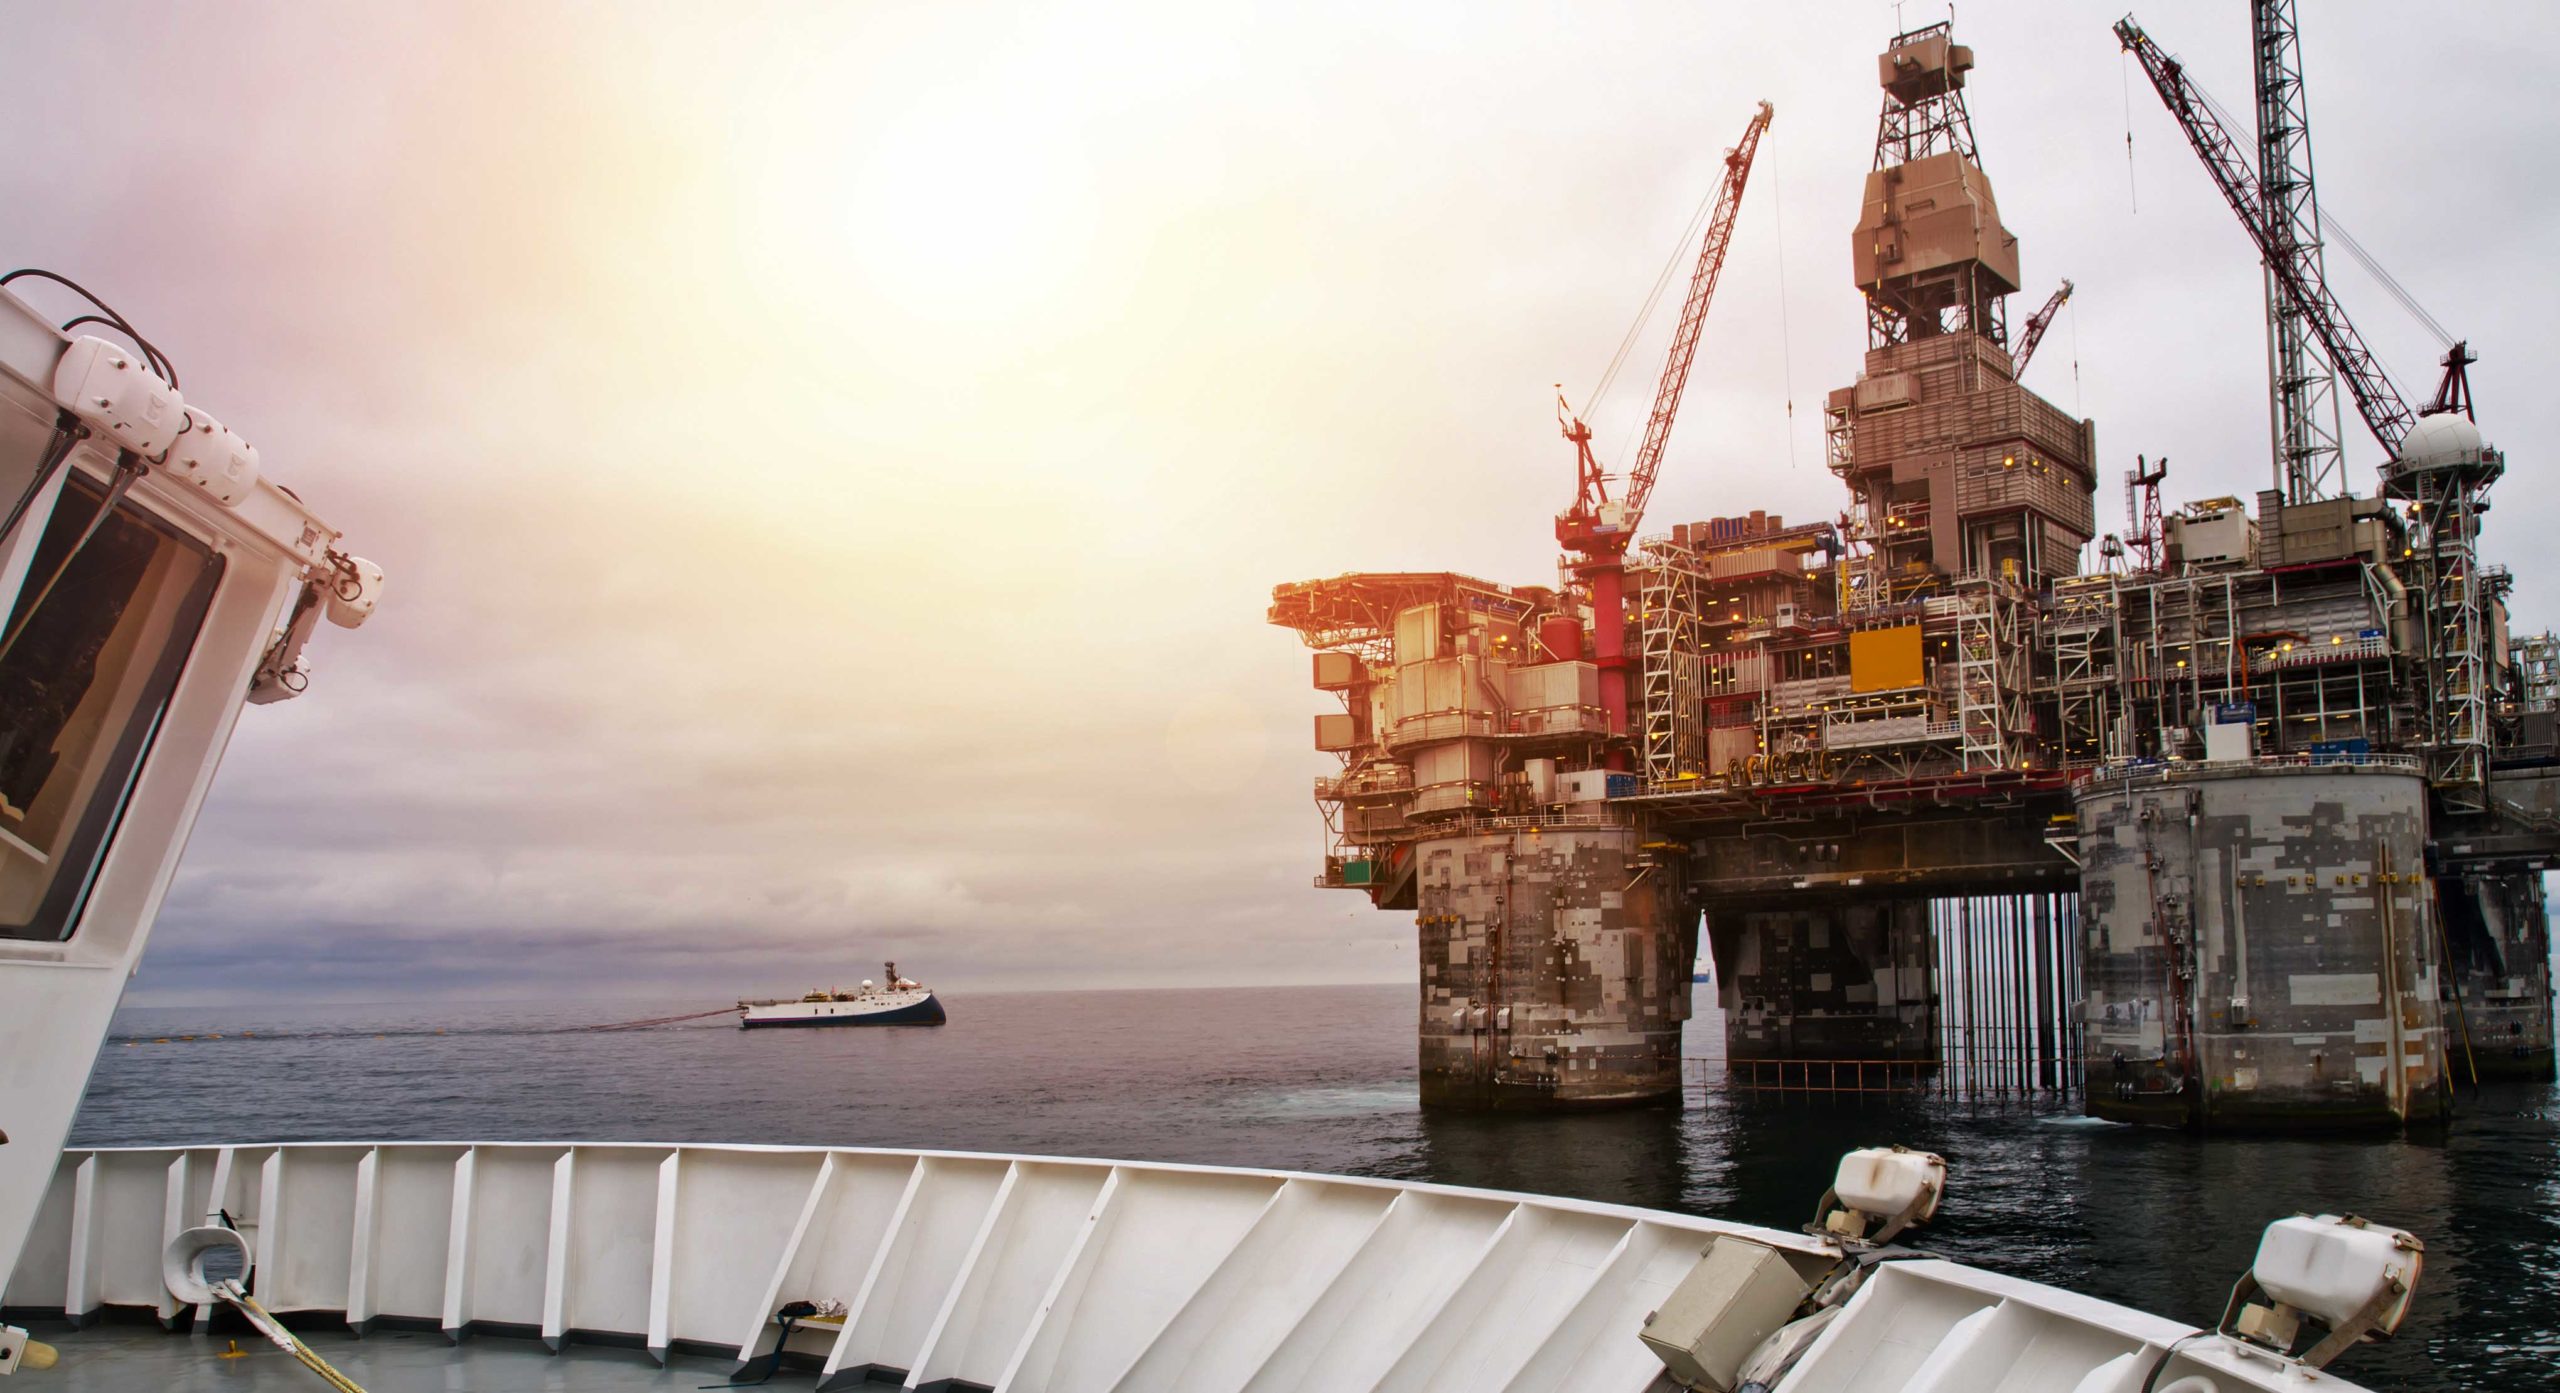 Maria project write off puts Norway appraisal practices in the spotlight